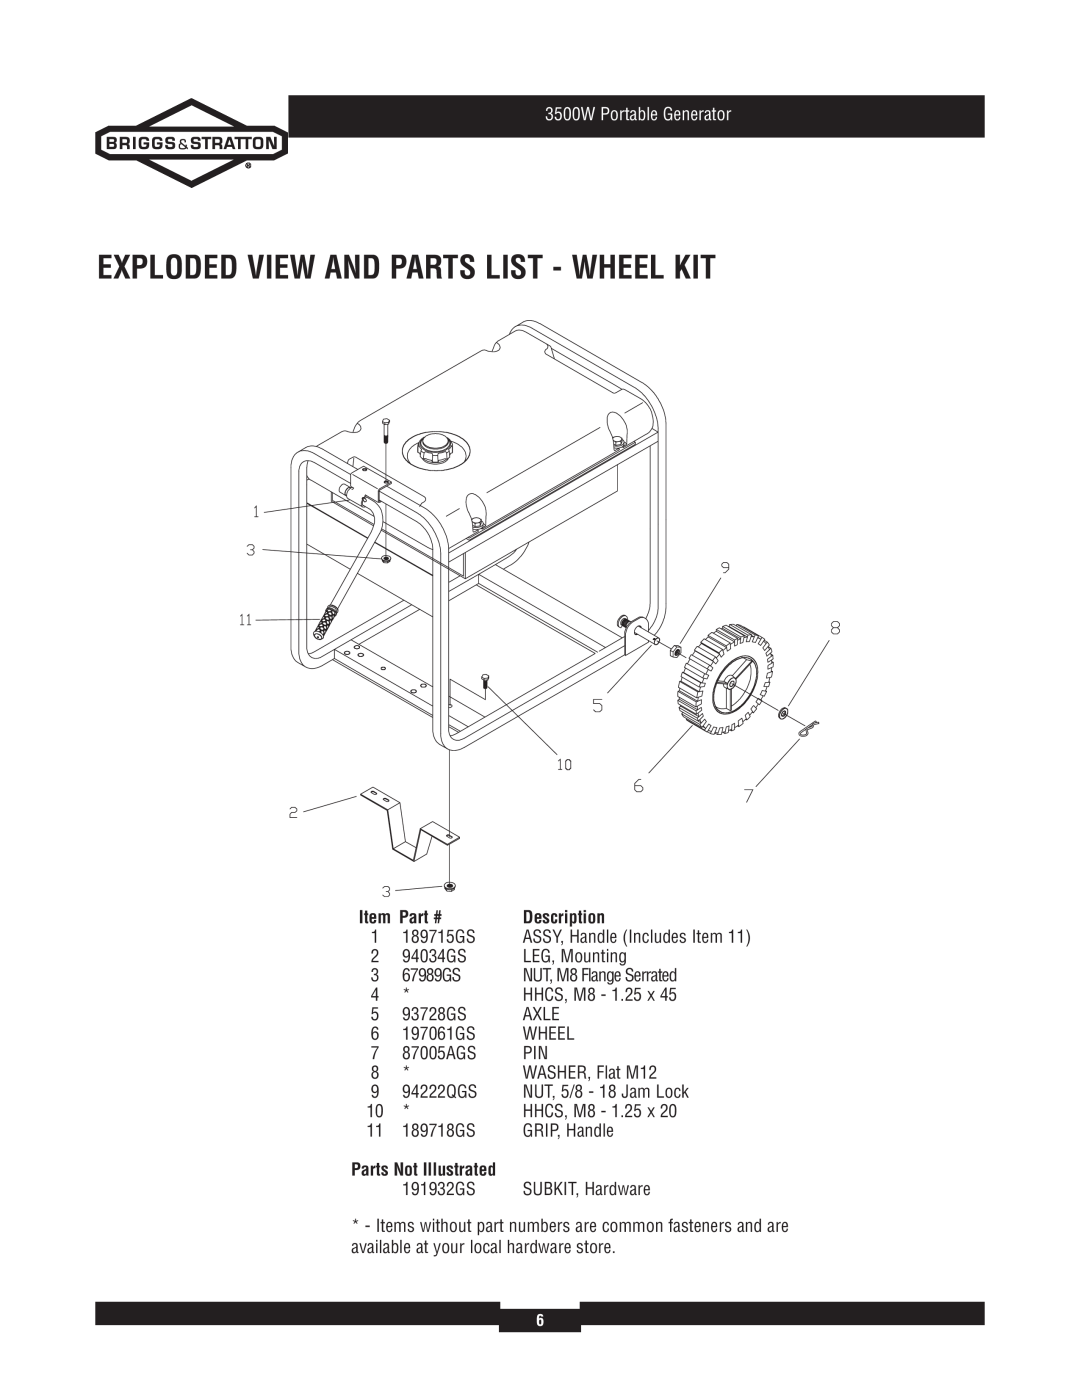 Briggs & Stratton 030208-2 manual Exploded View And Parts List - Wheel Kit, 3500W Portable Generator, Parts Not Illustrated 